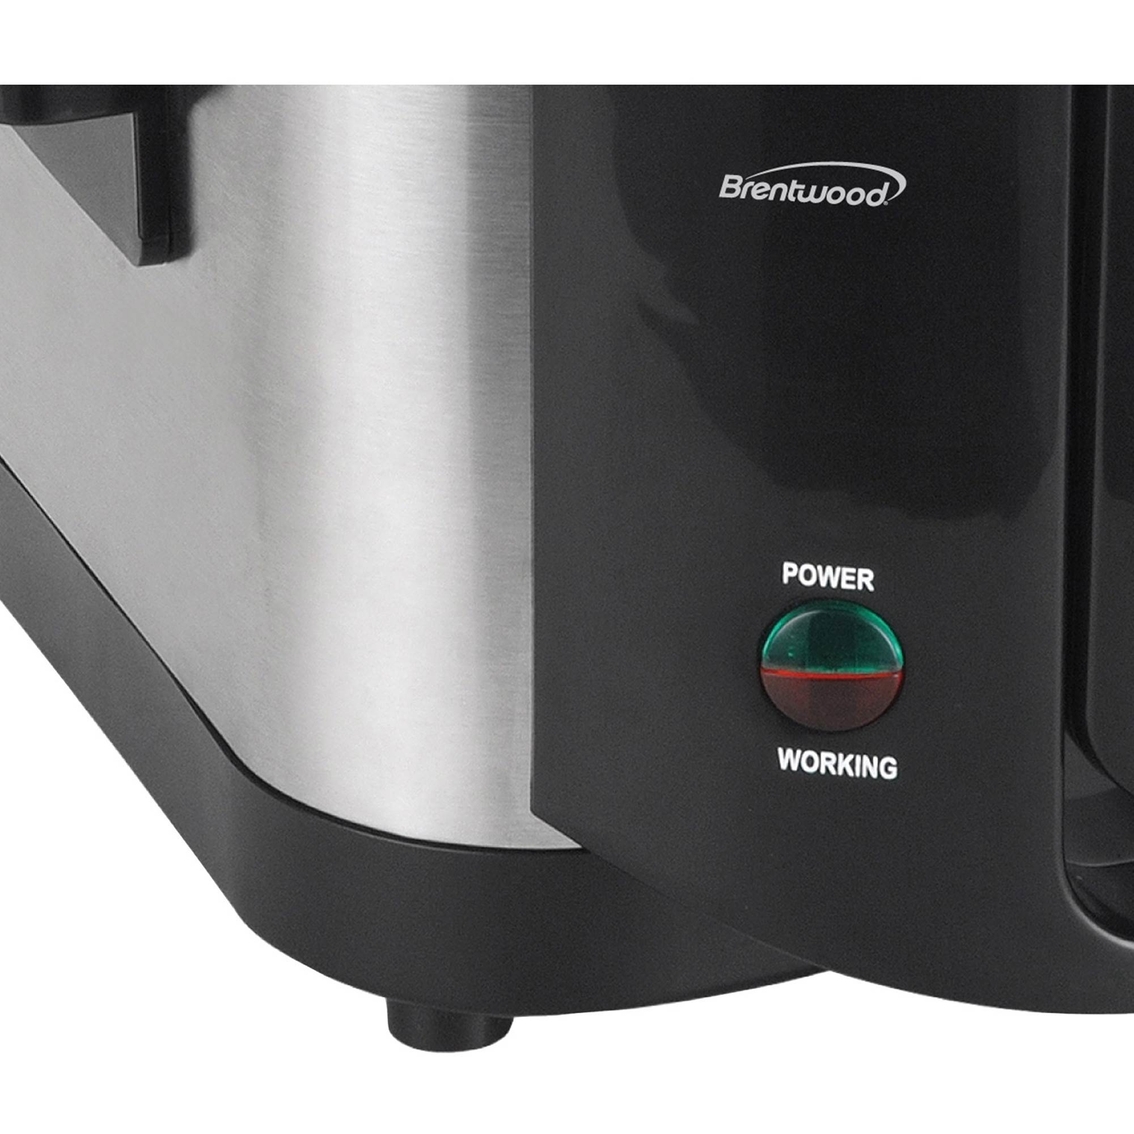 Brentwood 8 Cup Electric Deep Fryer - Image 6 of 7